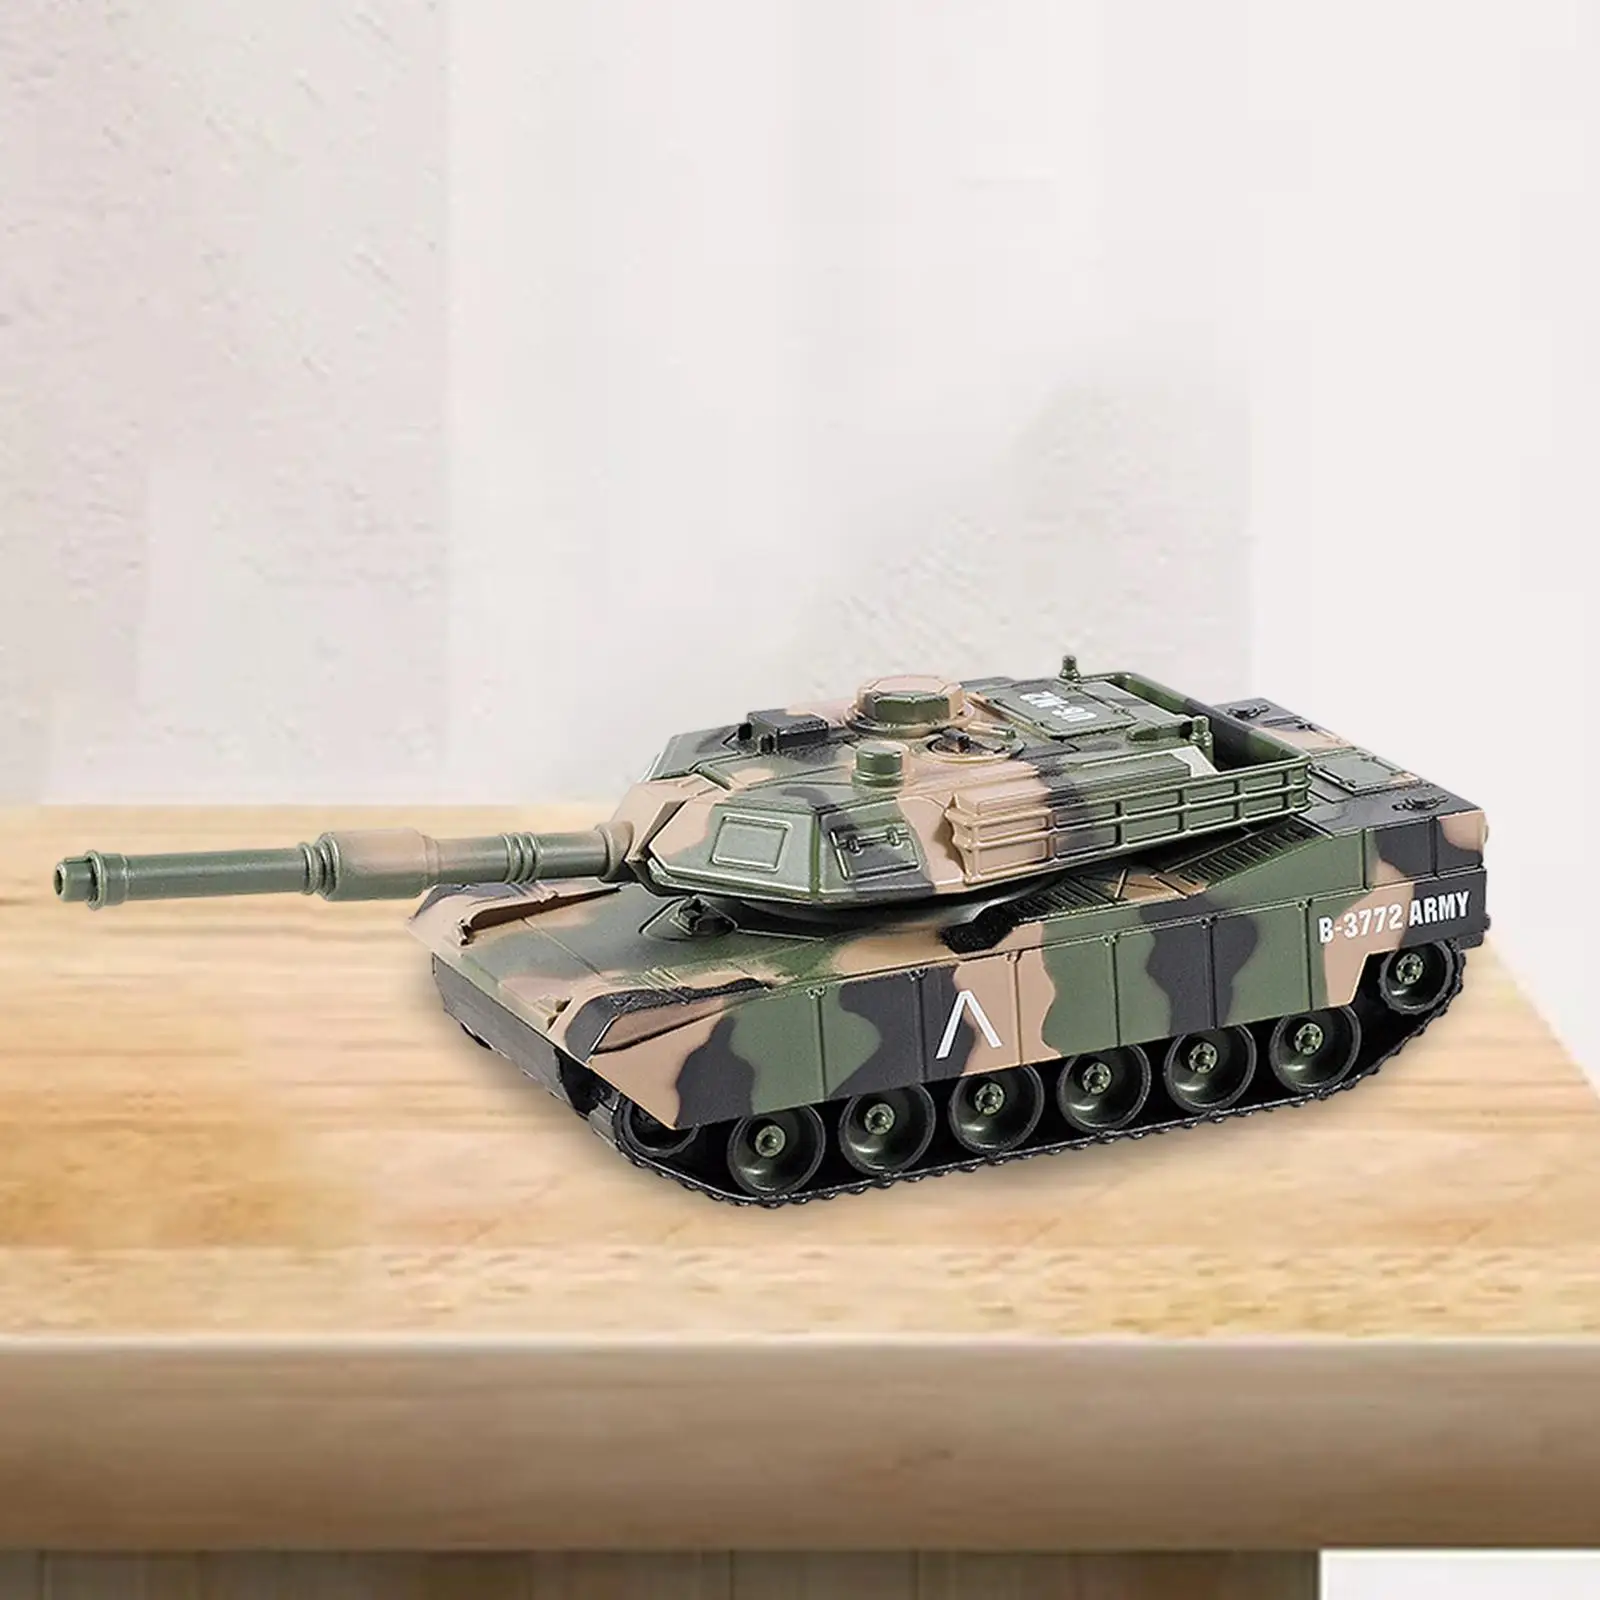 1:24 Tank Toy Rotating Fort Pullback Motion Realistic Party Favors Vehicle Alloy Diecast Tank for 3-7 Years Old Girls Kids Gift